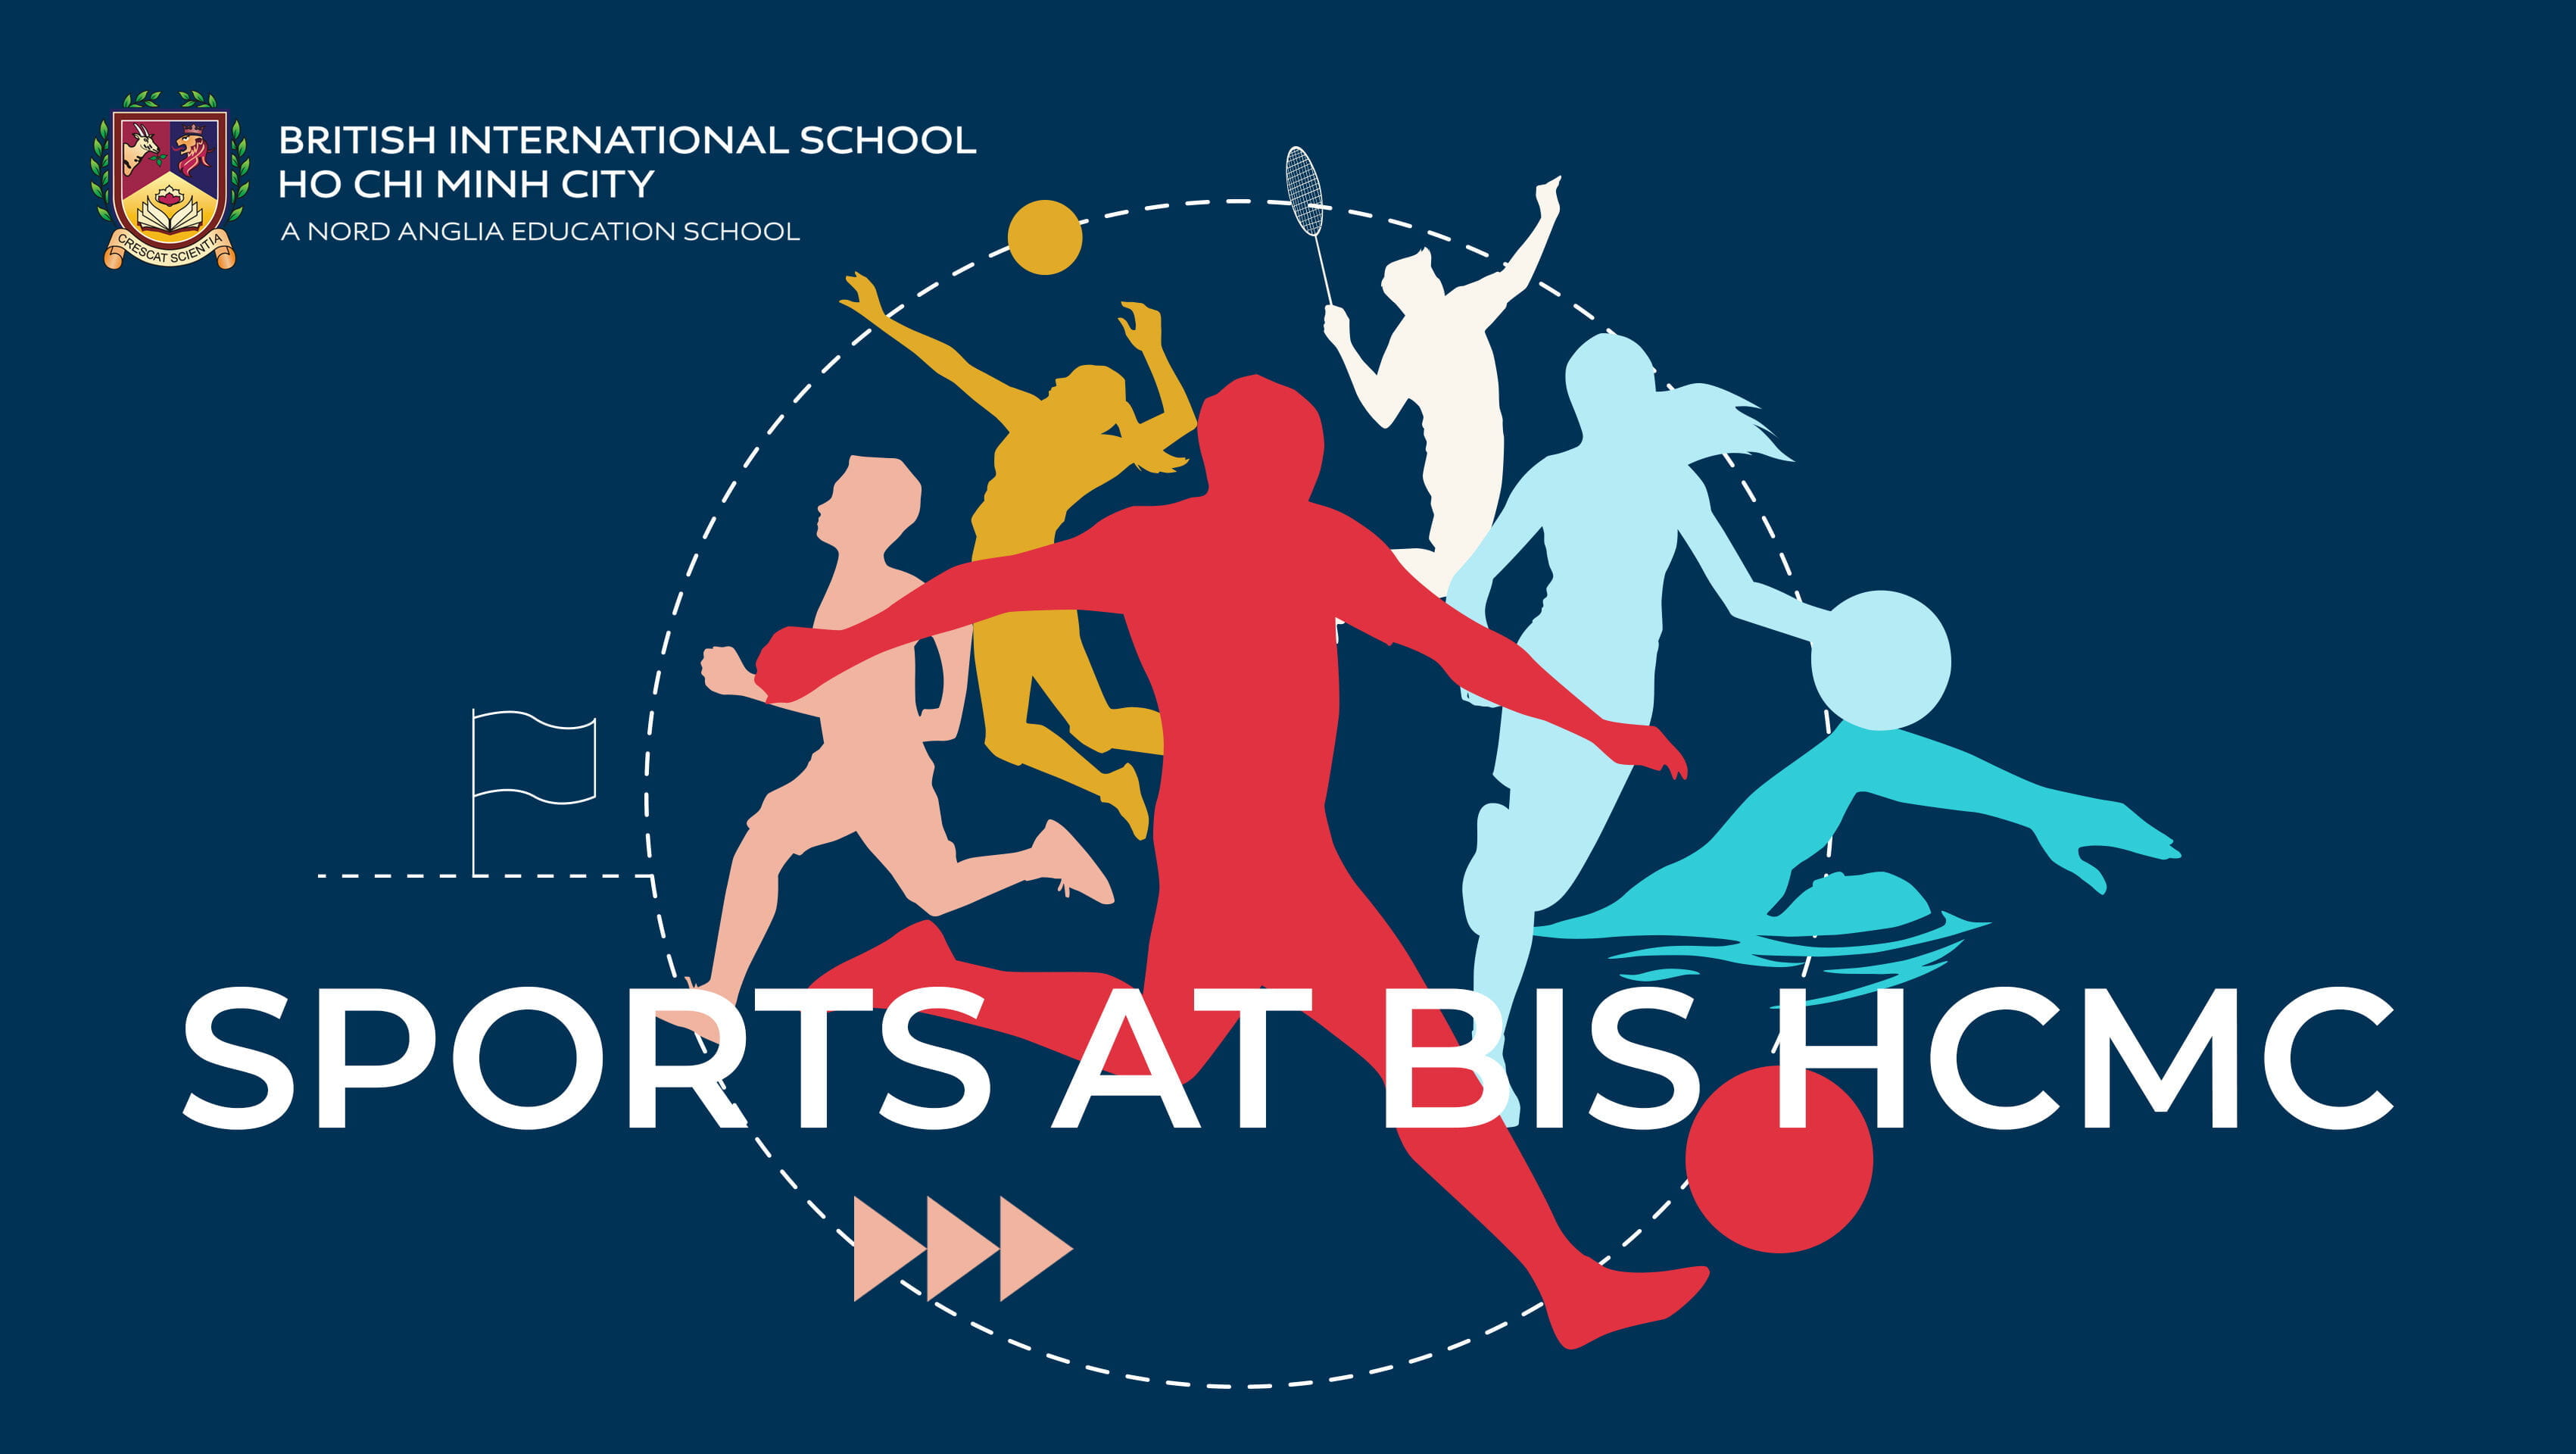 BIS HCMC sports teams kick-start the 2023-24 season with commitment and determination-BIS HCMC sport teams kick start the season-Sports